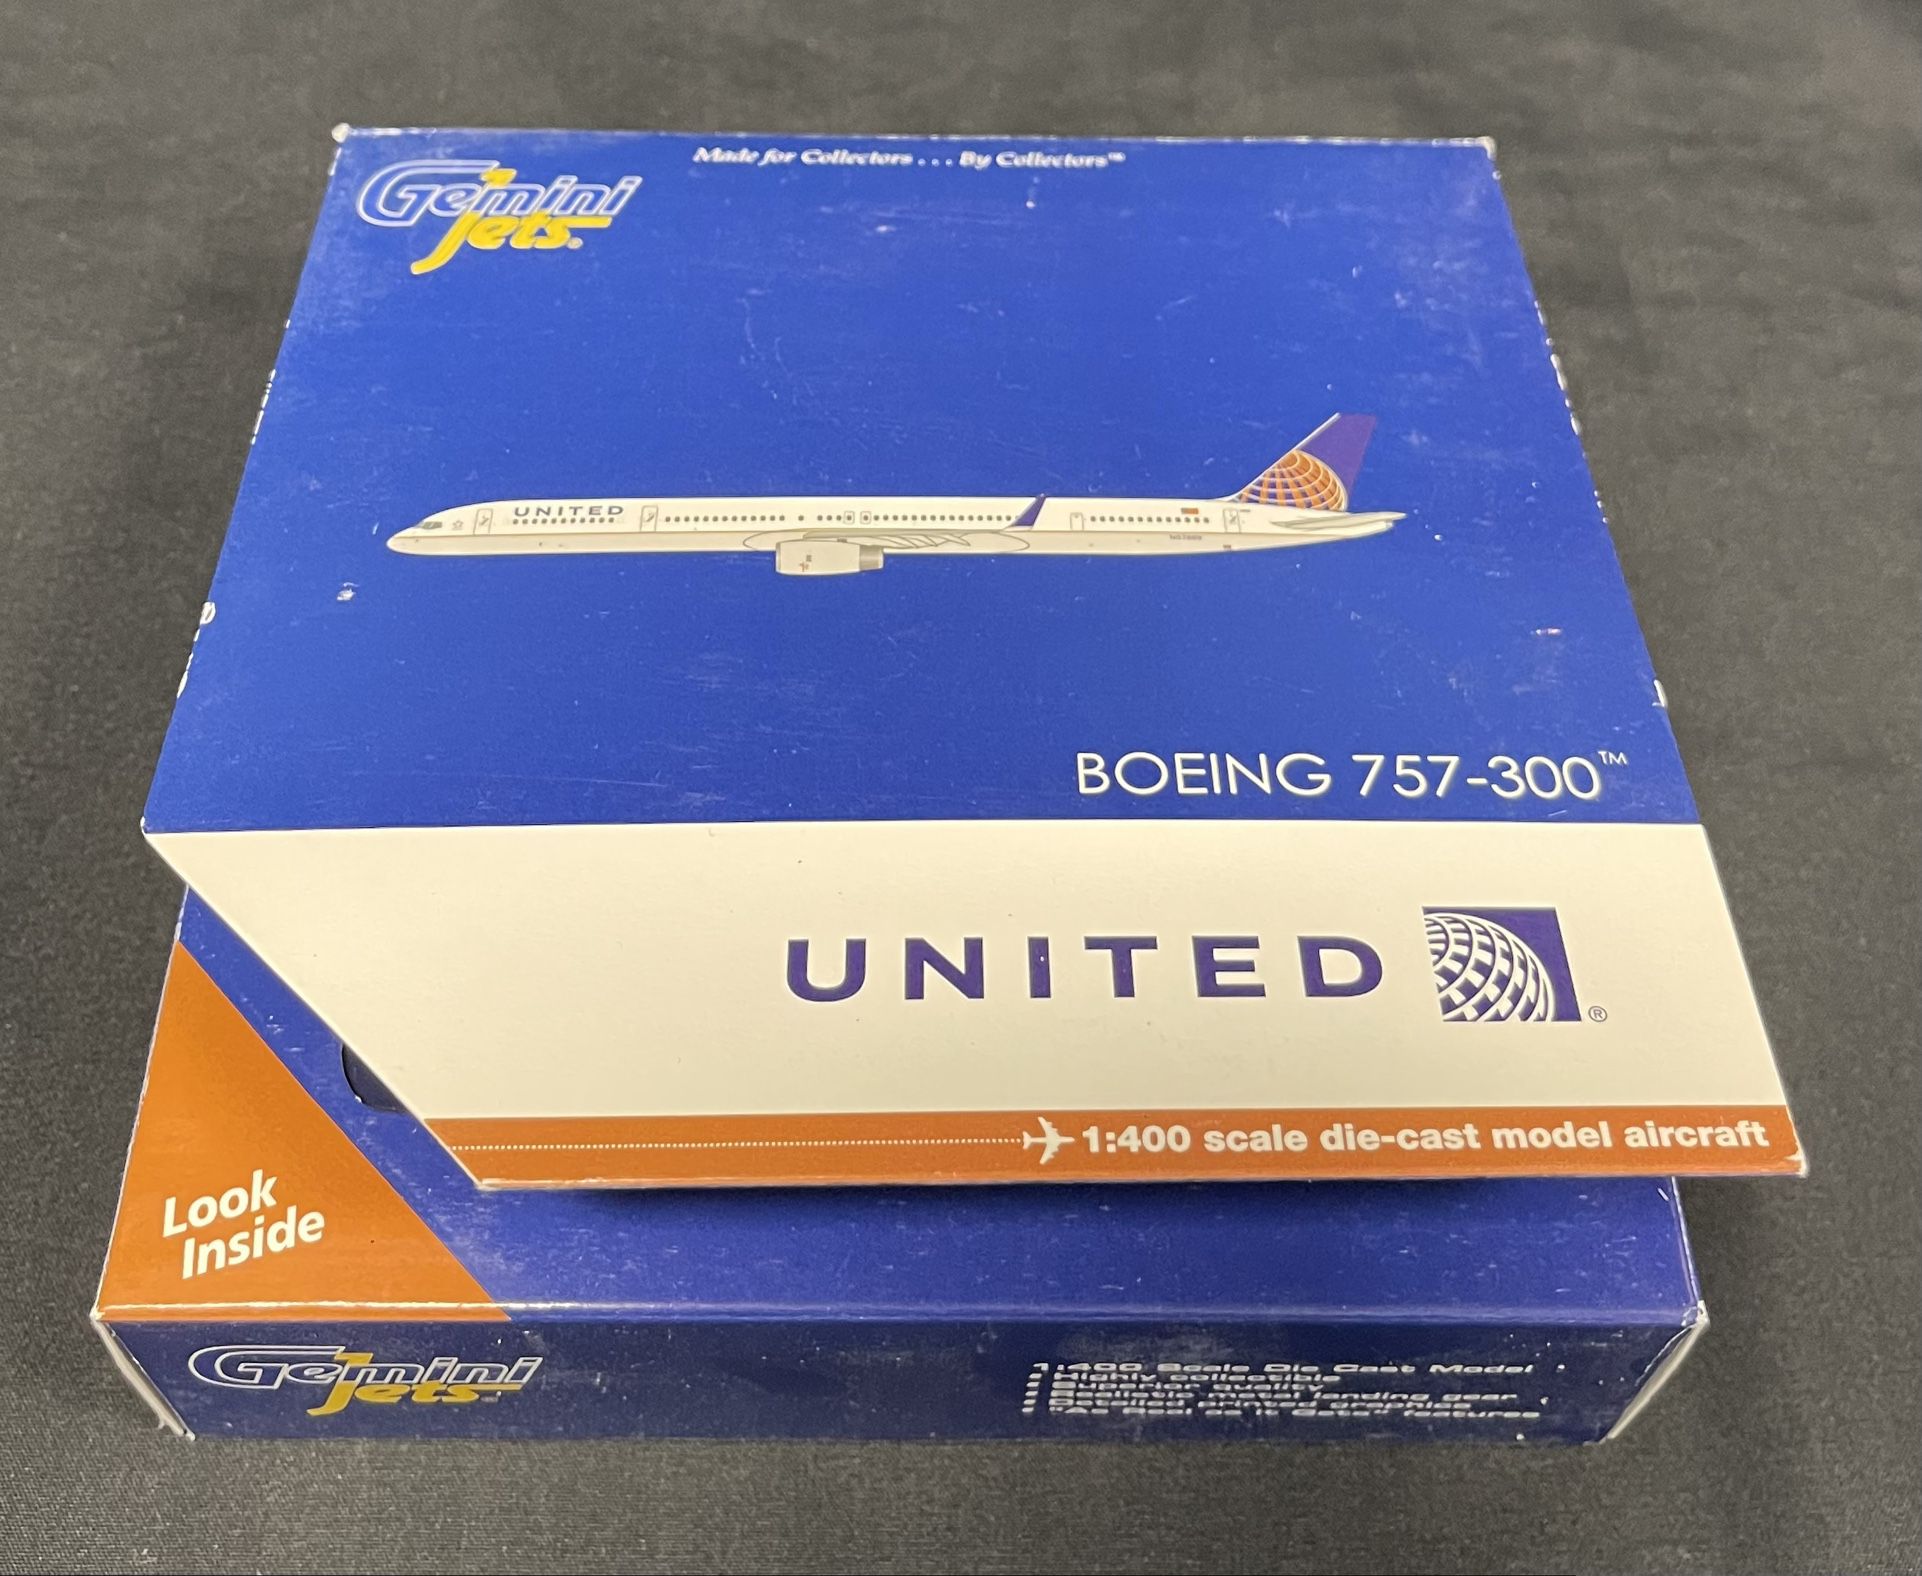 United Boeing 757-300 Model Aircraft 